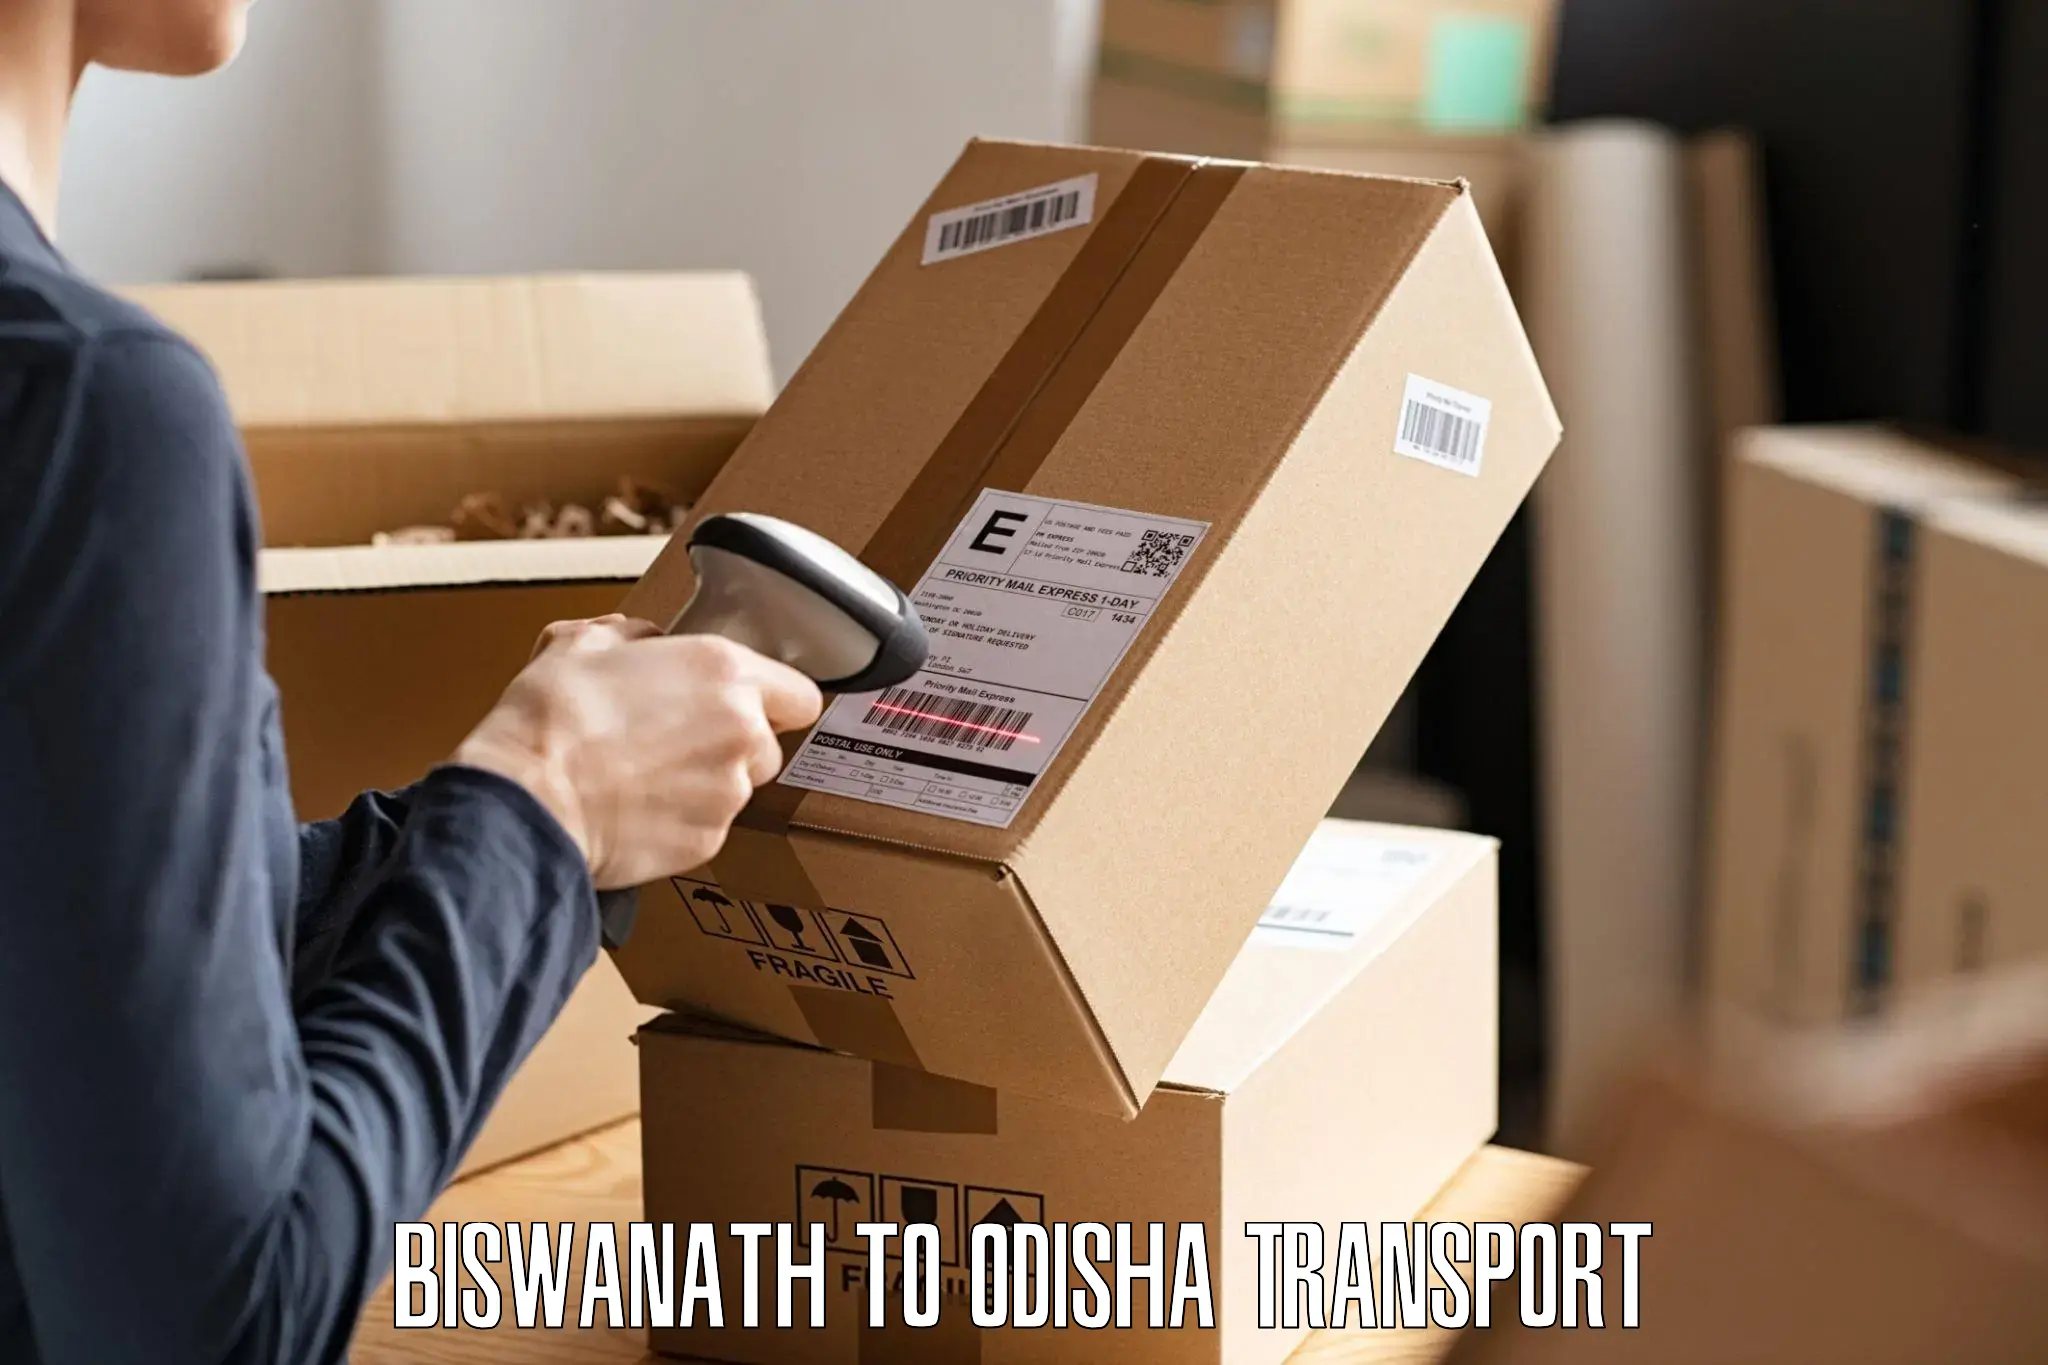 Road transport online services in Biswanath to Dhenkanal